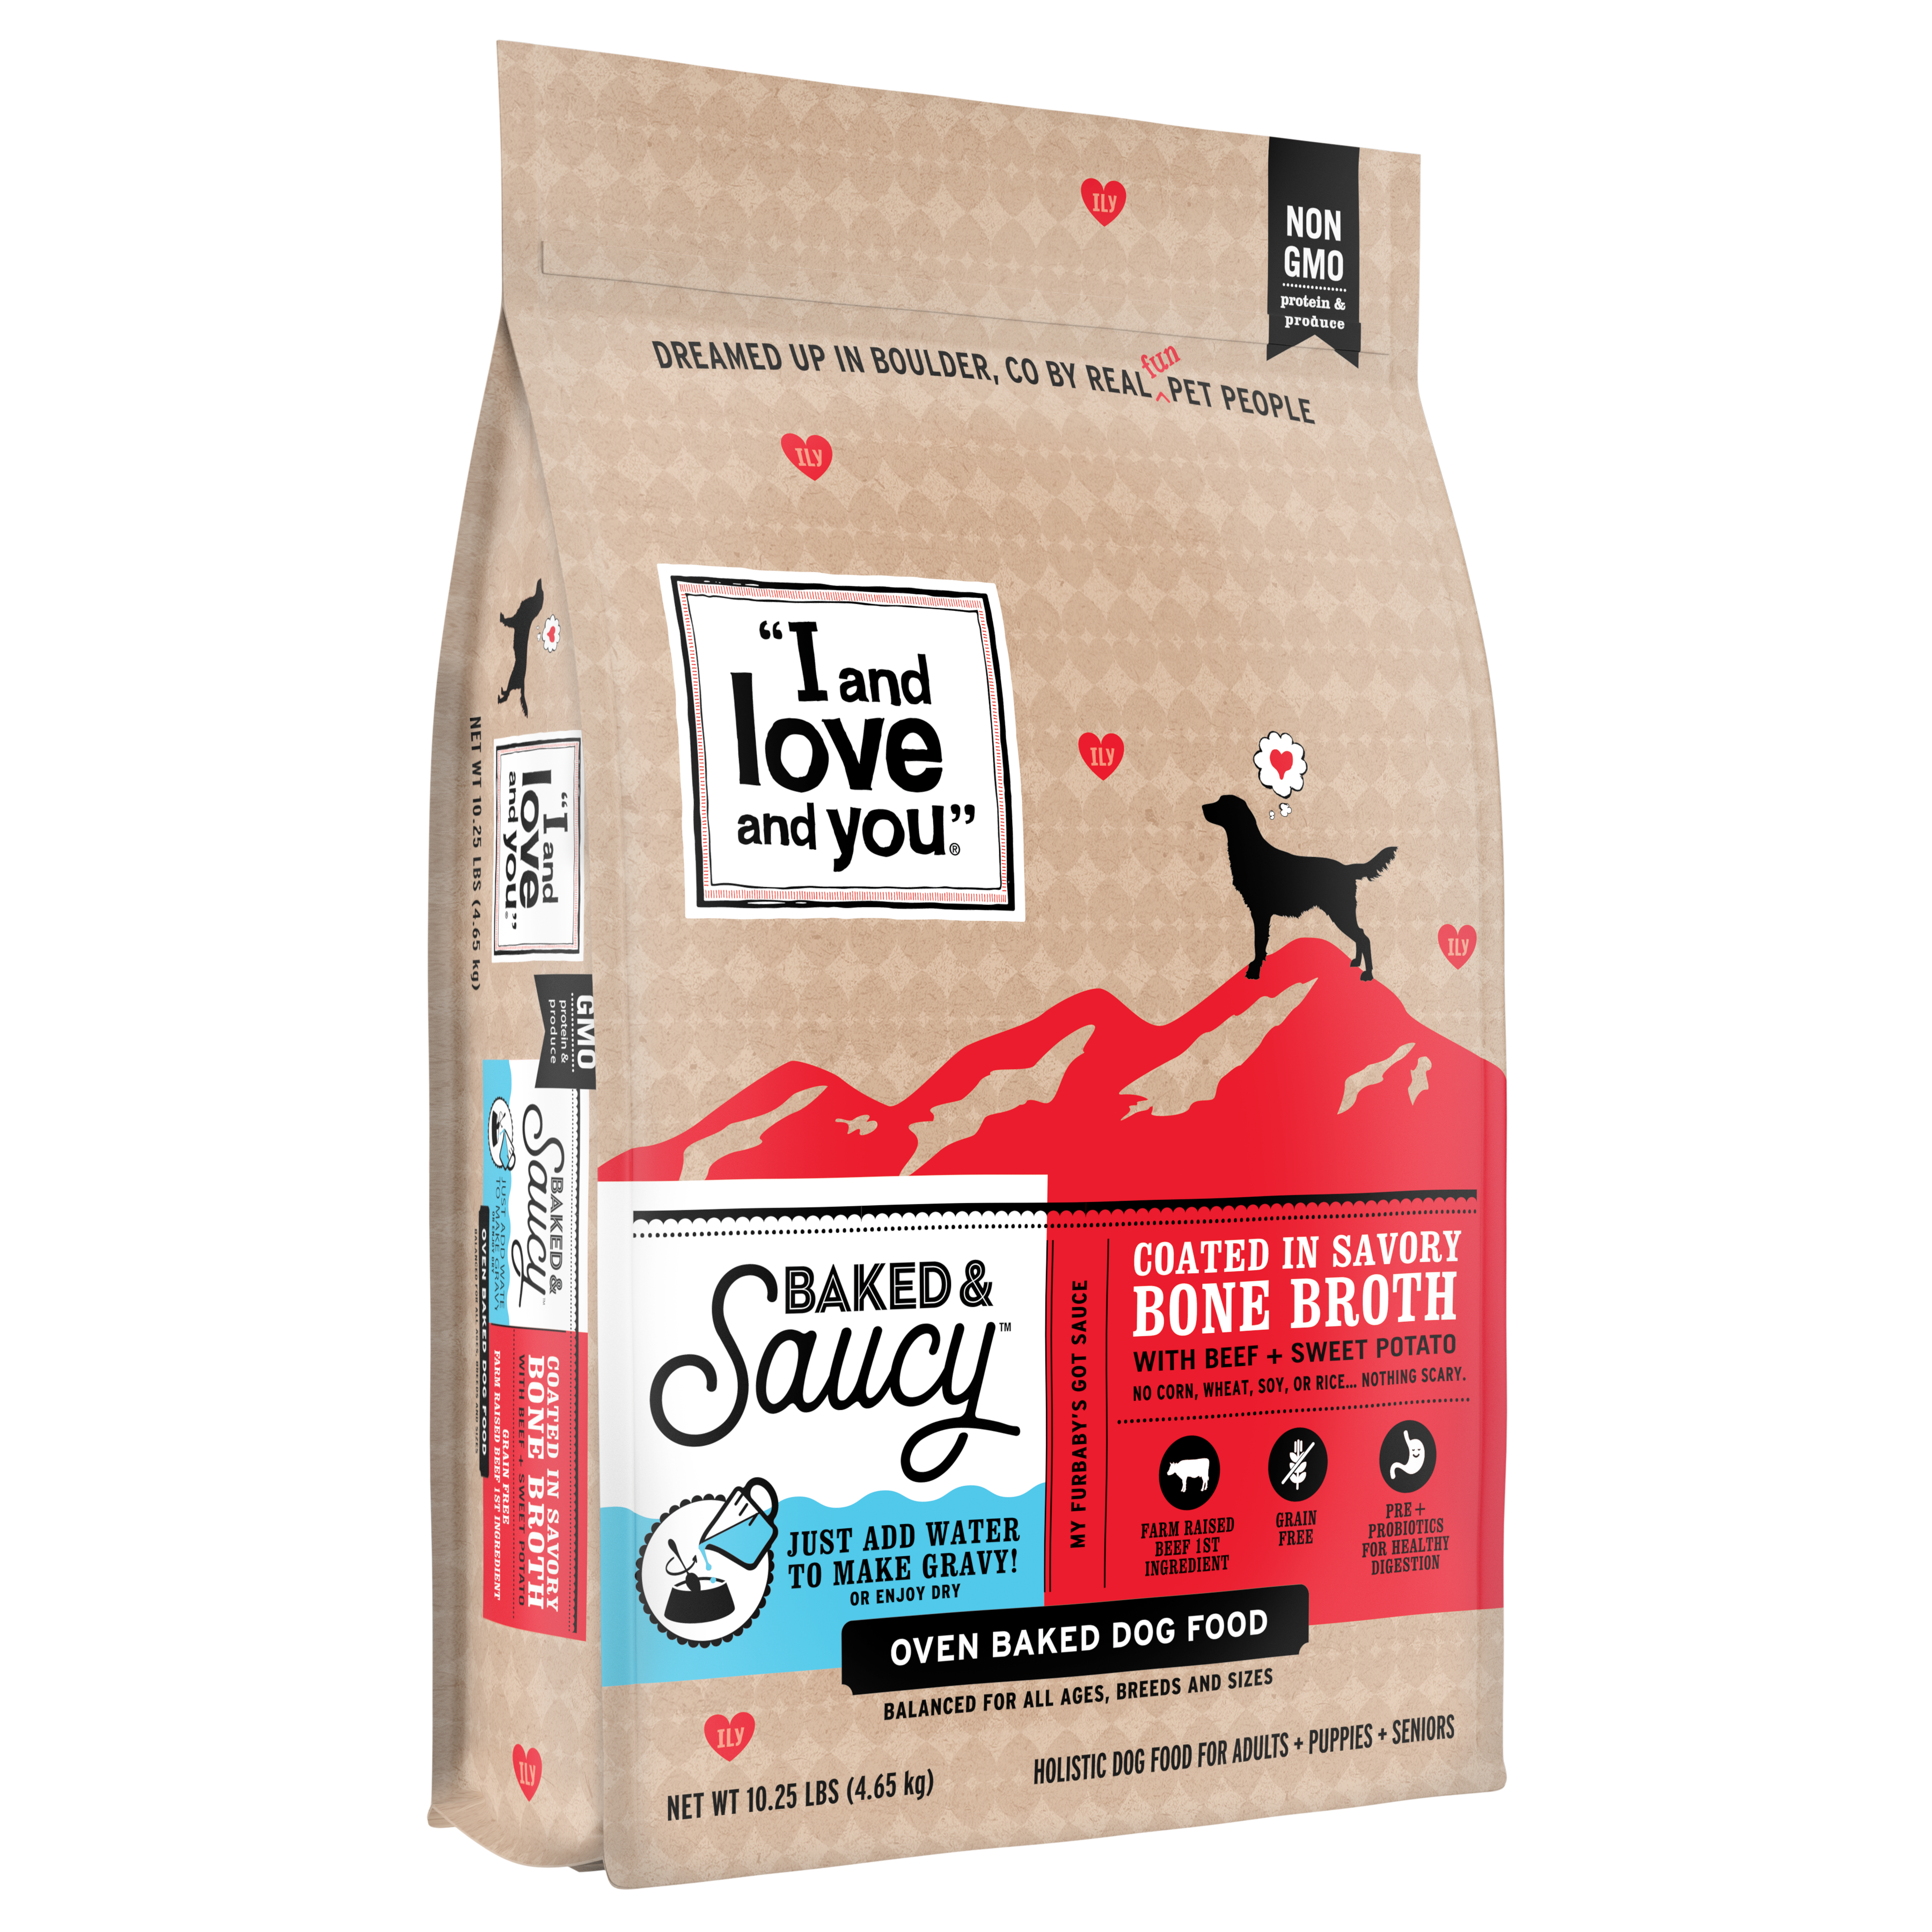 Baked & Saucy is a coated kibble that can be rehydrated from “I and love and you” with help from a co-manufacturing partner.